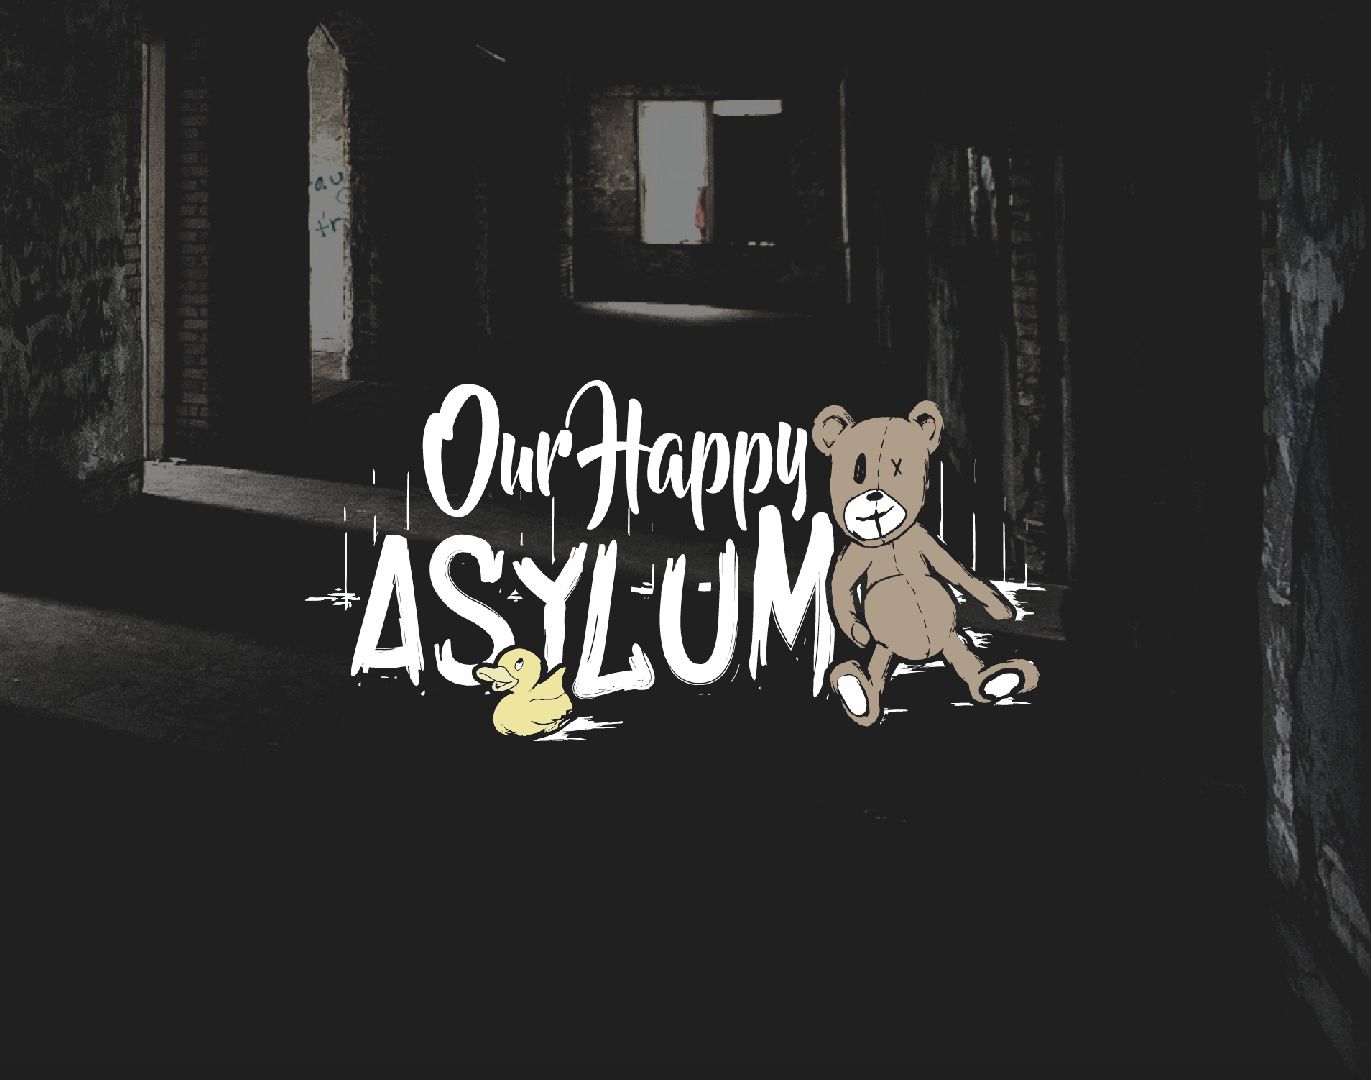 Platforming horror game 'Our Happy Asylum' heads to Switch in Spring